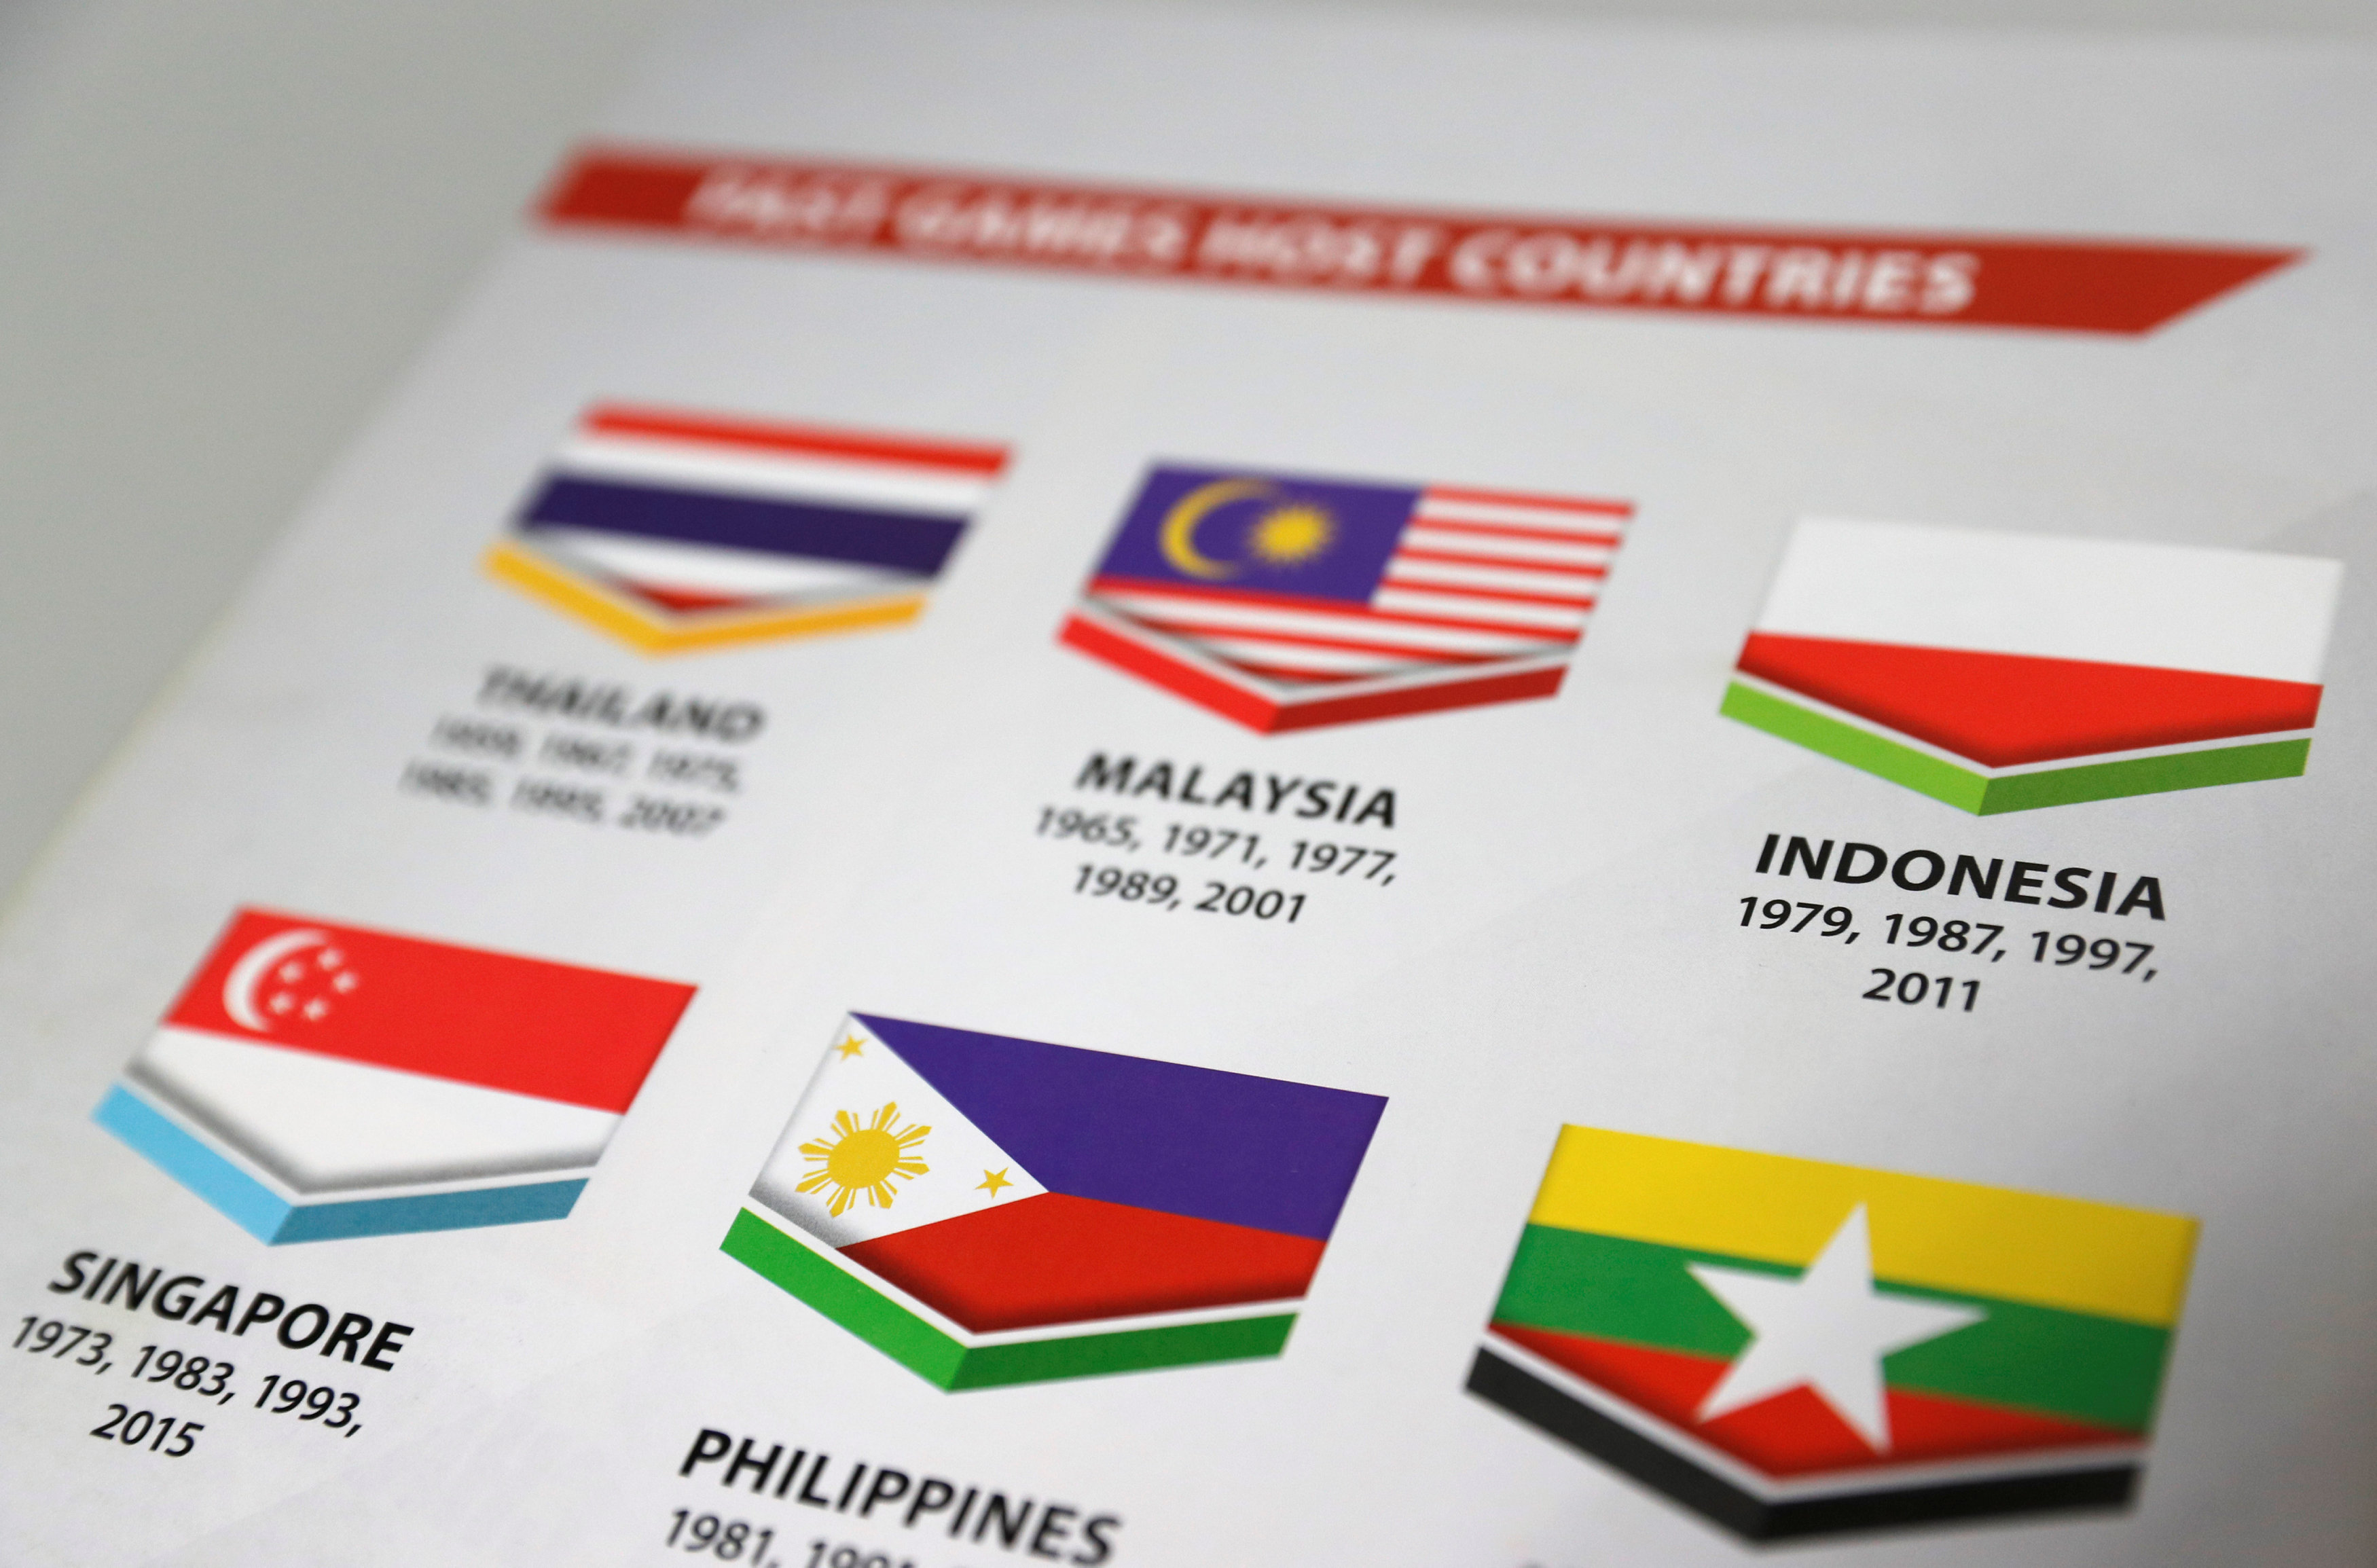 Malaysia apologises for Indonesia flag blunder, reprinting regional games guide